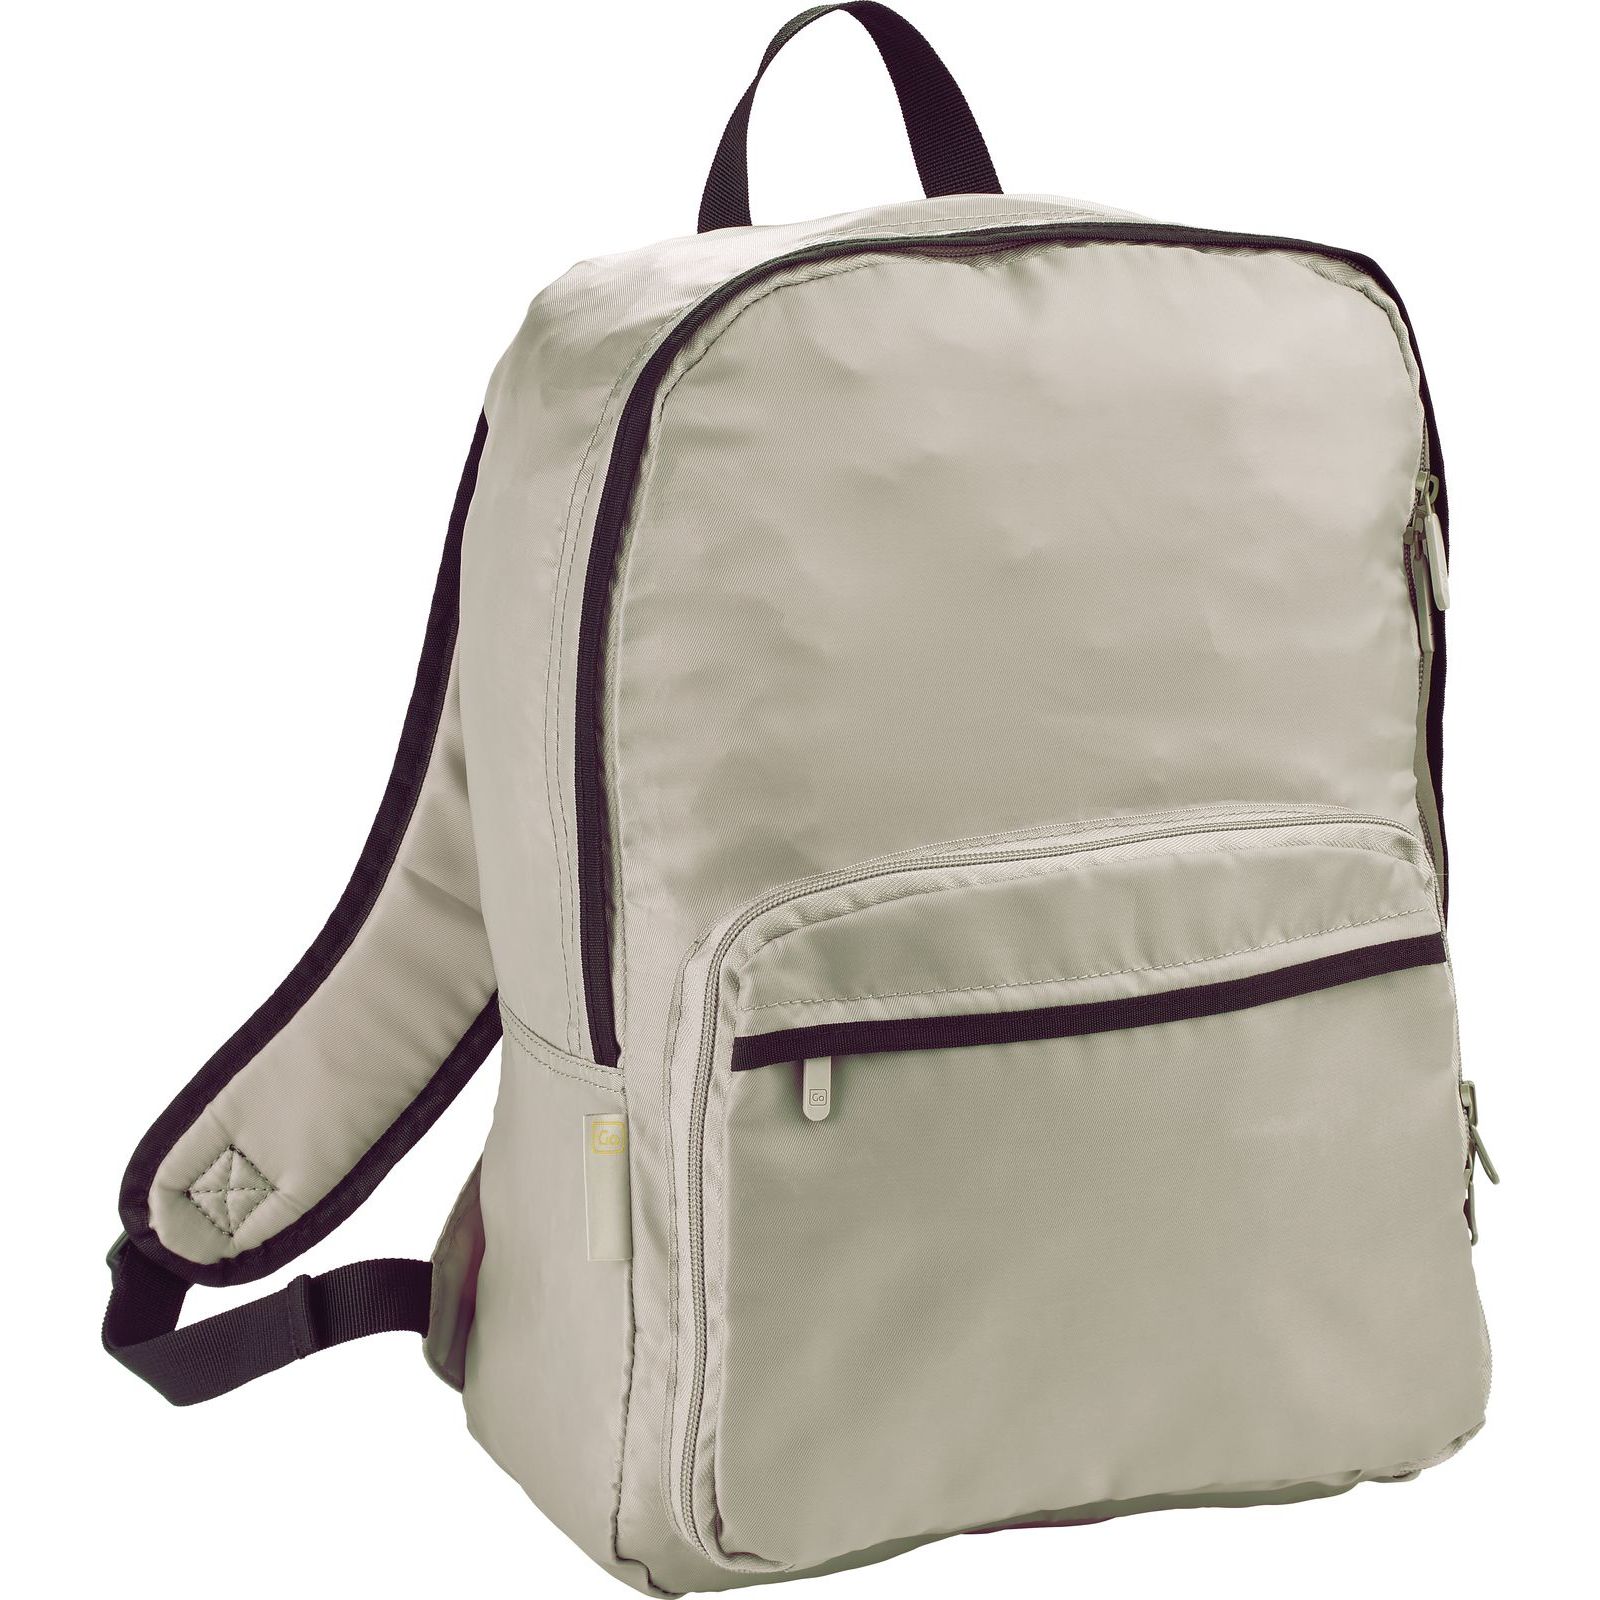 Elbourn Foldable Backpack Lightweight, Small Rucksack for Men and